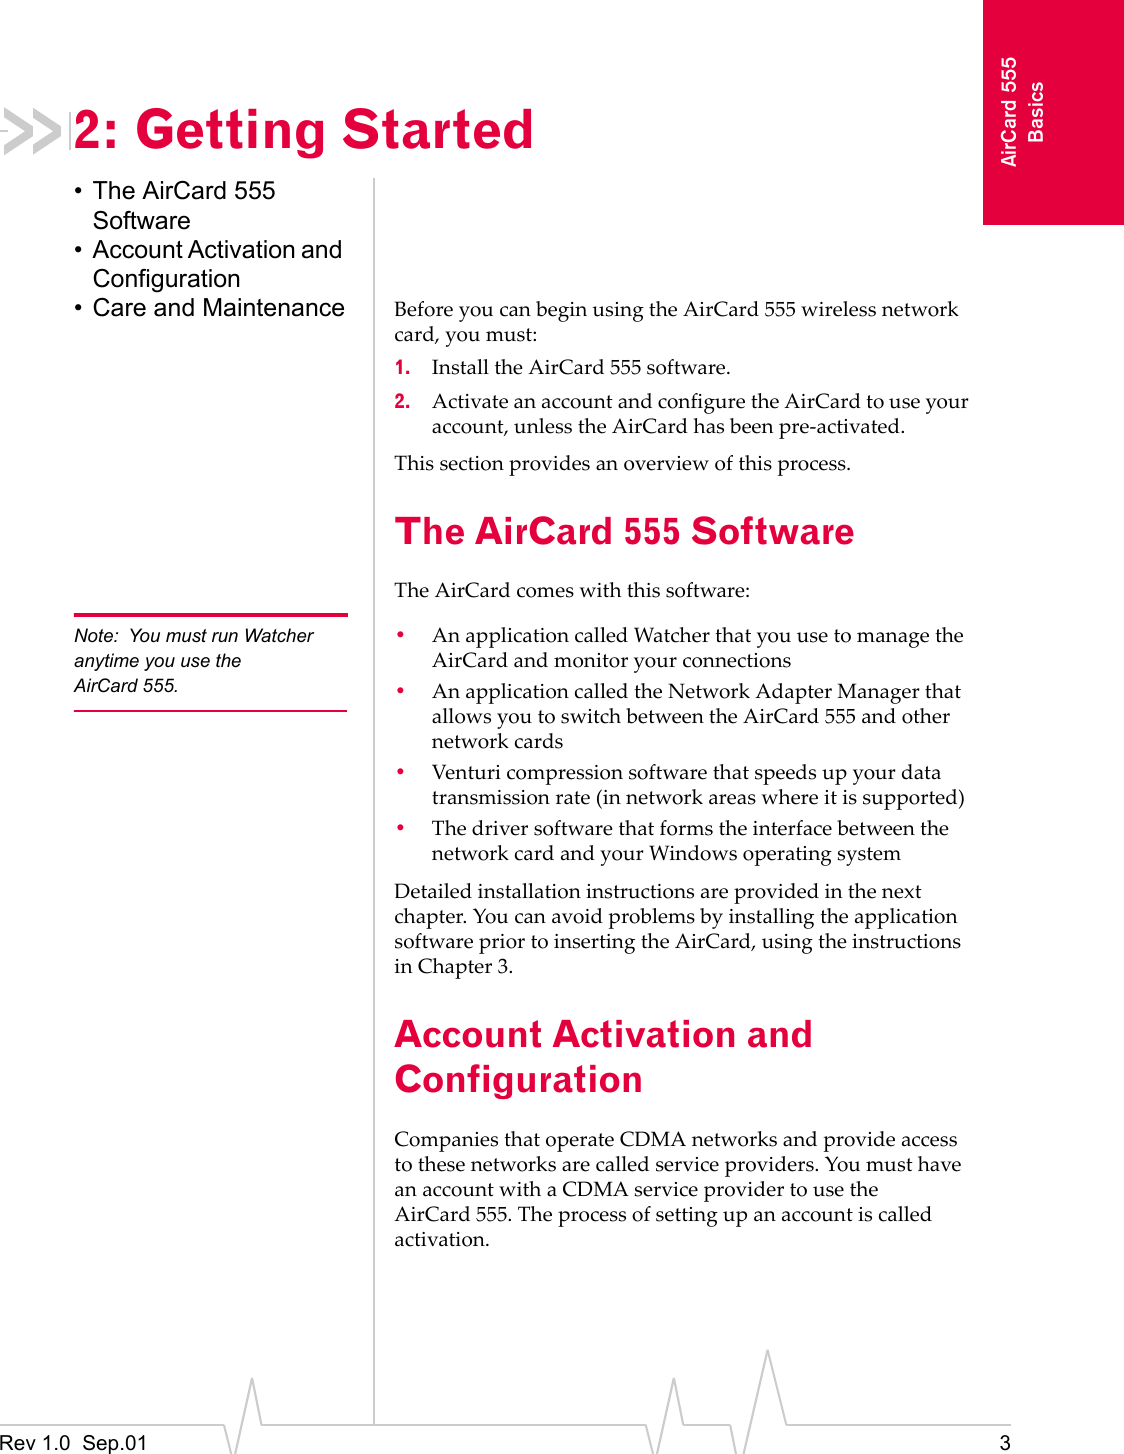 Rev 1.0  Sep.01 3AirCard 555Basics2: Getting Started• The AirCard 555 Software• Account Activation and Configuration• Care and Maintenance Before you can begin using the AirCard 555 wireless network card, you must:1. Install the AirCard 555 software.2. Activate an account and configure the AirCard to use your account, unless the AirCard has been pre-activated.This section provides an overview of this process.The AirCard 555 SoftwareThe AirCard comes with this software:Note: You must run Watcher anytime you use the AirCard 555.•An application called Watcher that you use to manage the AirCard and monitor your connections•An application called the Network Adapter Manager that allows you to switch between the AirCard 555 and other network cards•Venturi compression software that speeds up your data transmission rate (in network areas where it is supported)•The driver software that forms the interface between the network card and your Windows operating systemDetailed installation instructions are provided in the next chapter. You can avoid problems by installing the application software prior to inserting the AirCard, using the instructions in Chapter 3.  Account Activation and ConfigurationCompanies that operate CDMA networks and provide access to these networks are called service providers. You must have an account with a CDMA service provider to use the AirCard 555. The process of setting up an account is called activation.